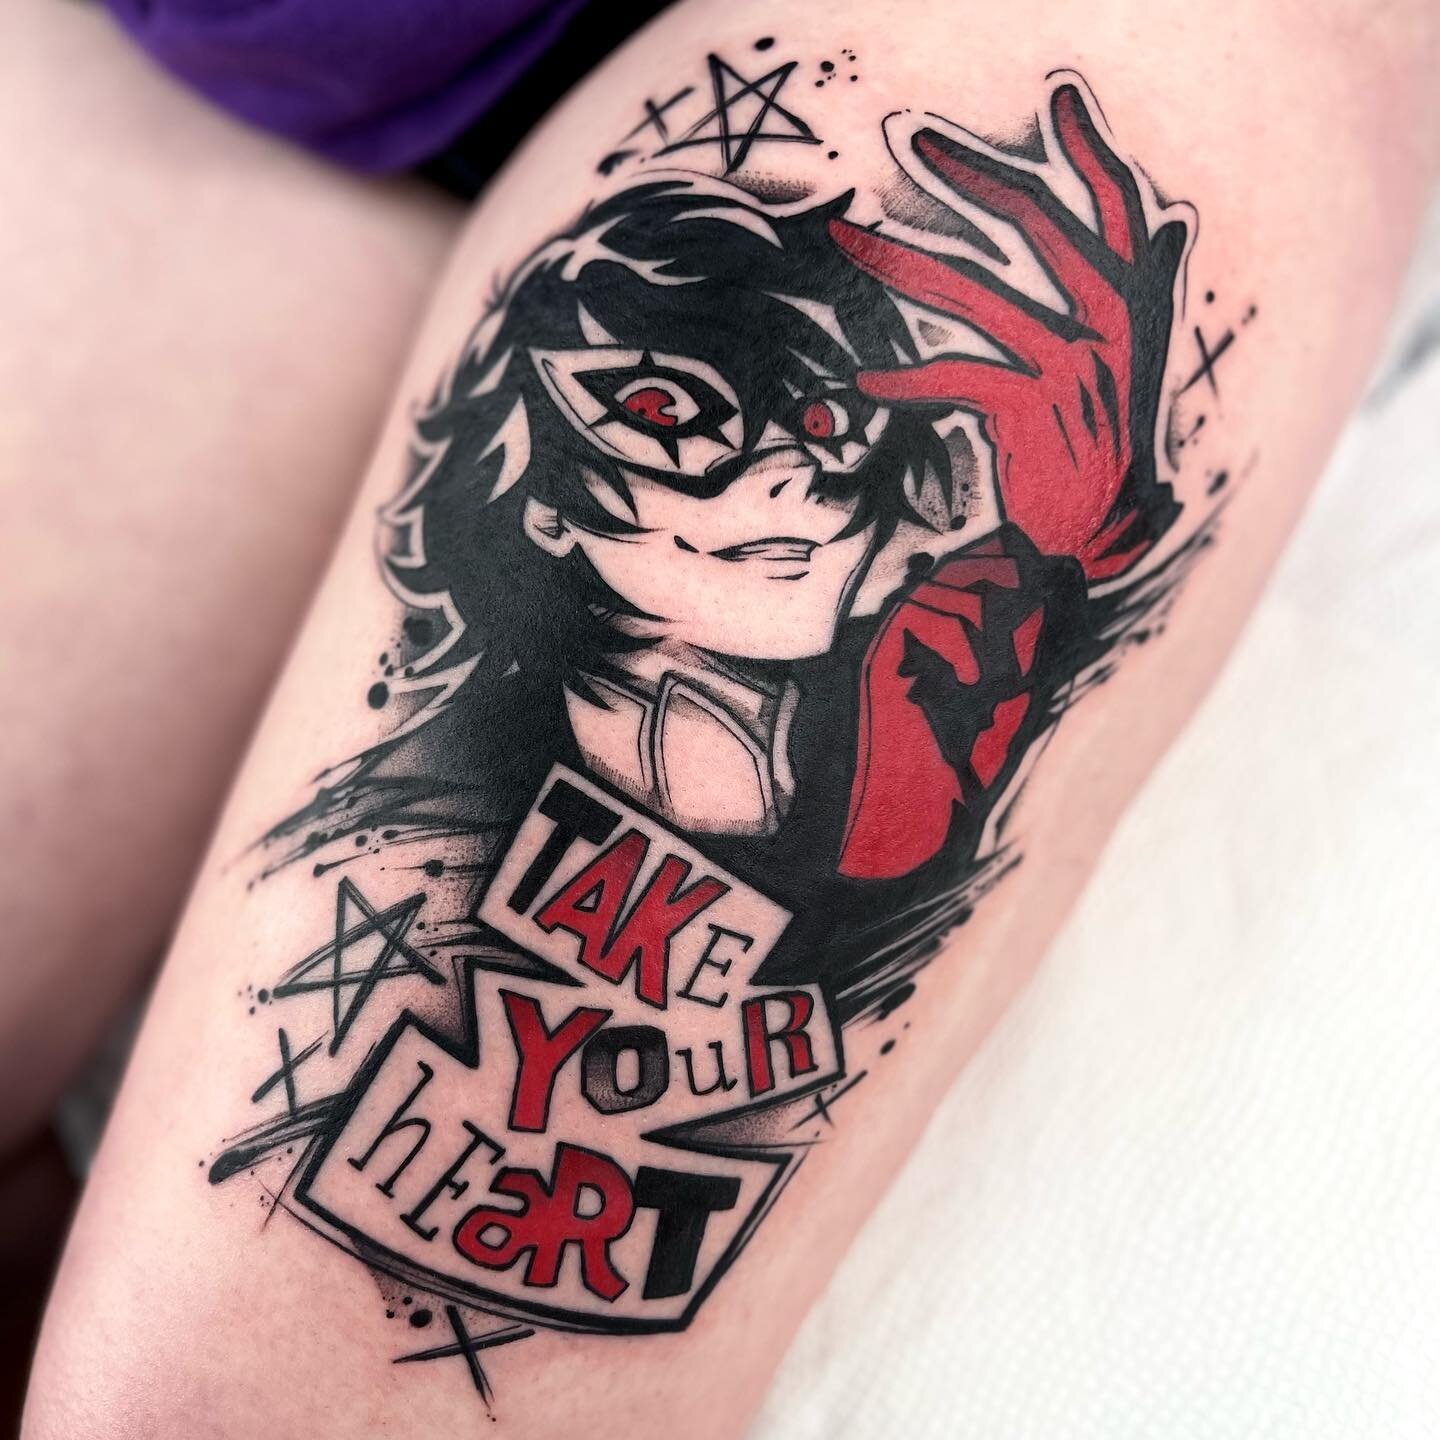 &ldquo;Lookin&rsquo; cool Joker!&rdquo; 

The protagonist of Persona 5! Thank you @halgoof so much for getting this tattoo from me!! I took a short hiatus from posting but I&rsquo;m back, so this is my first one of the year and also happens to be a p